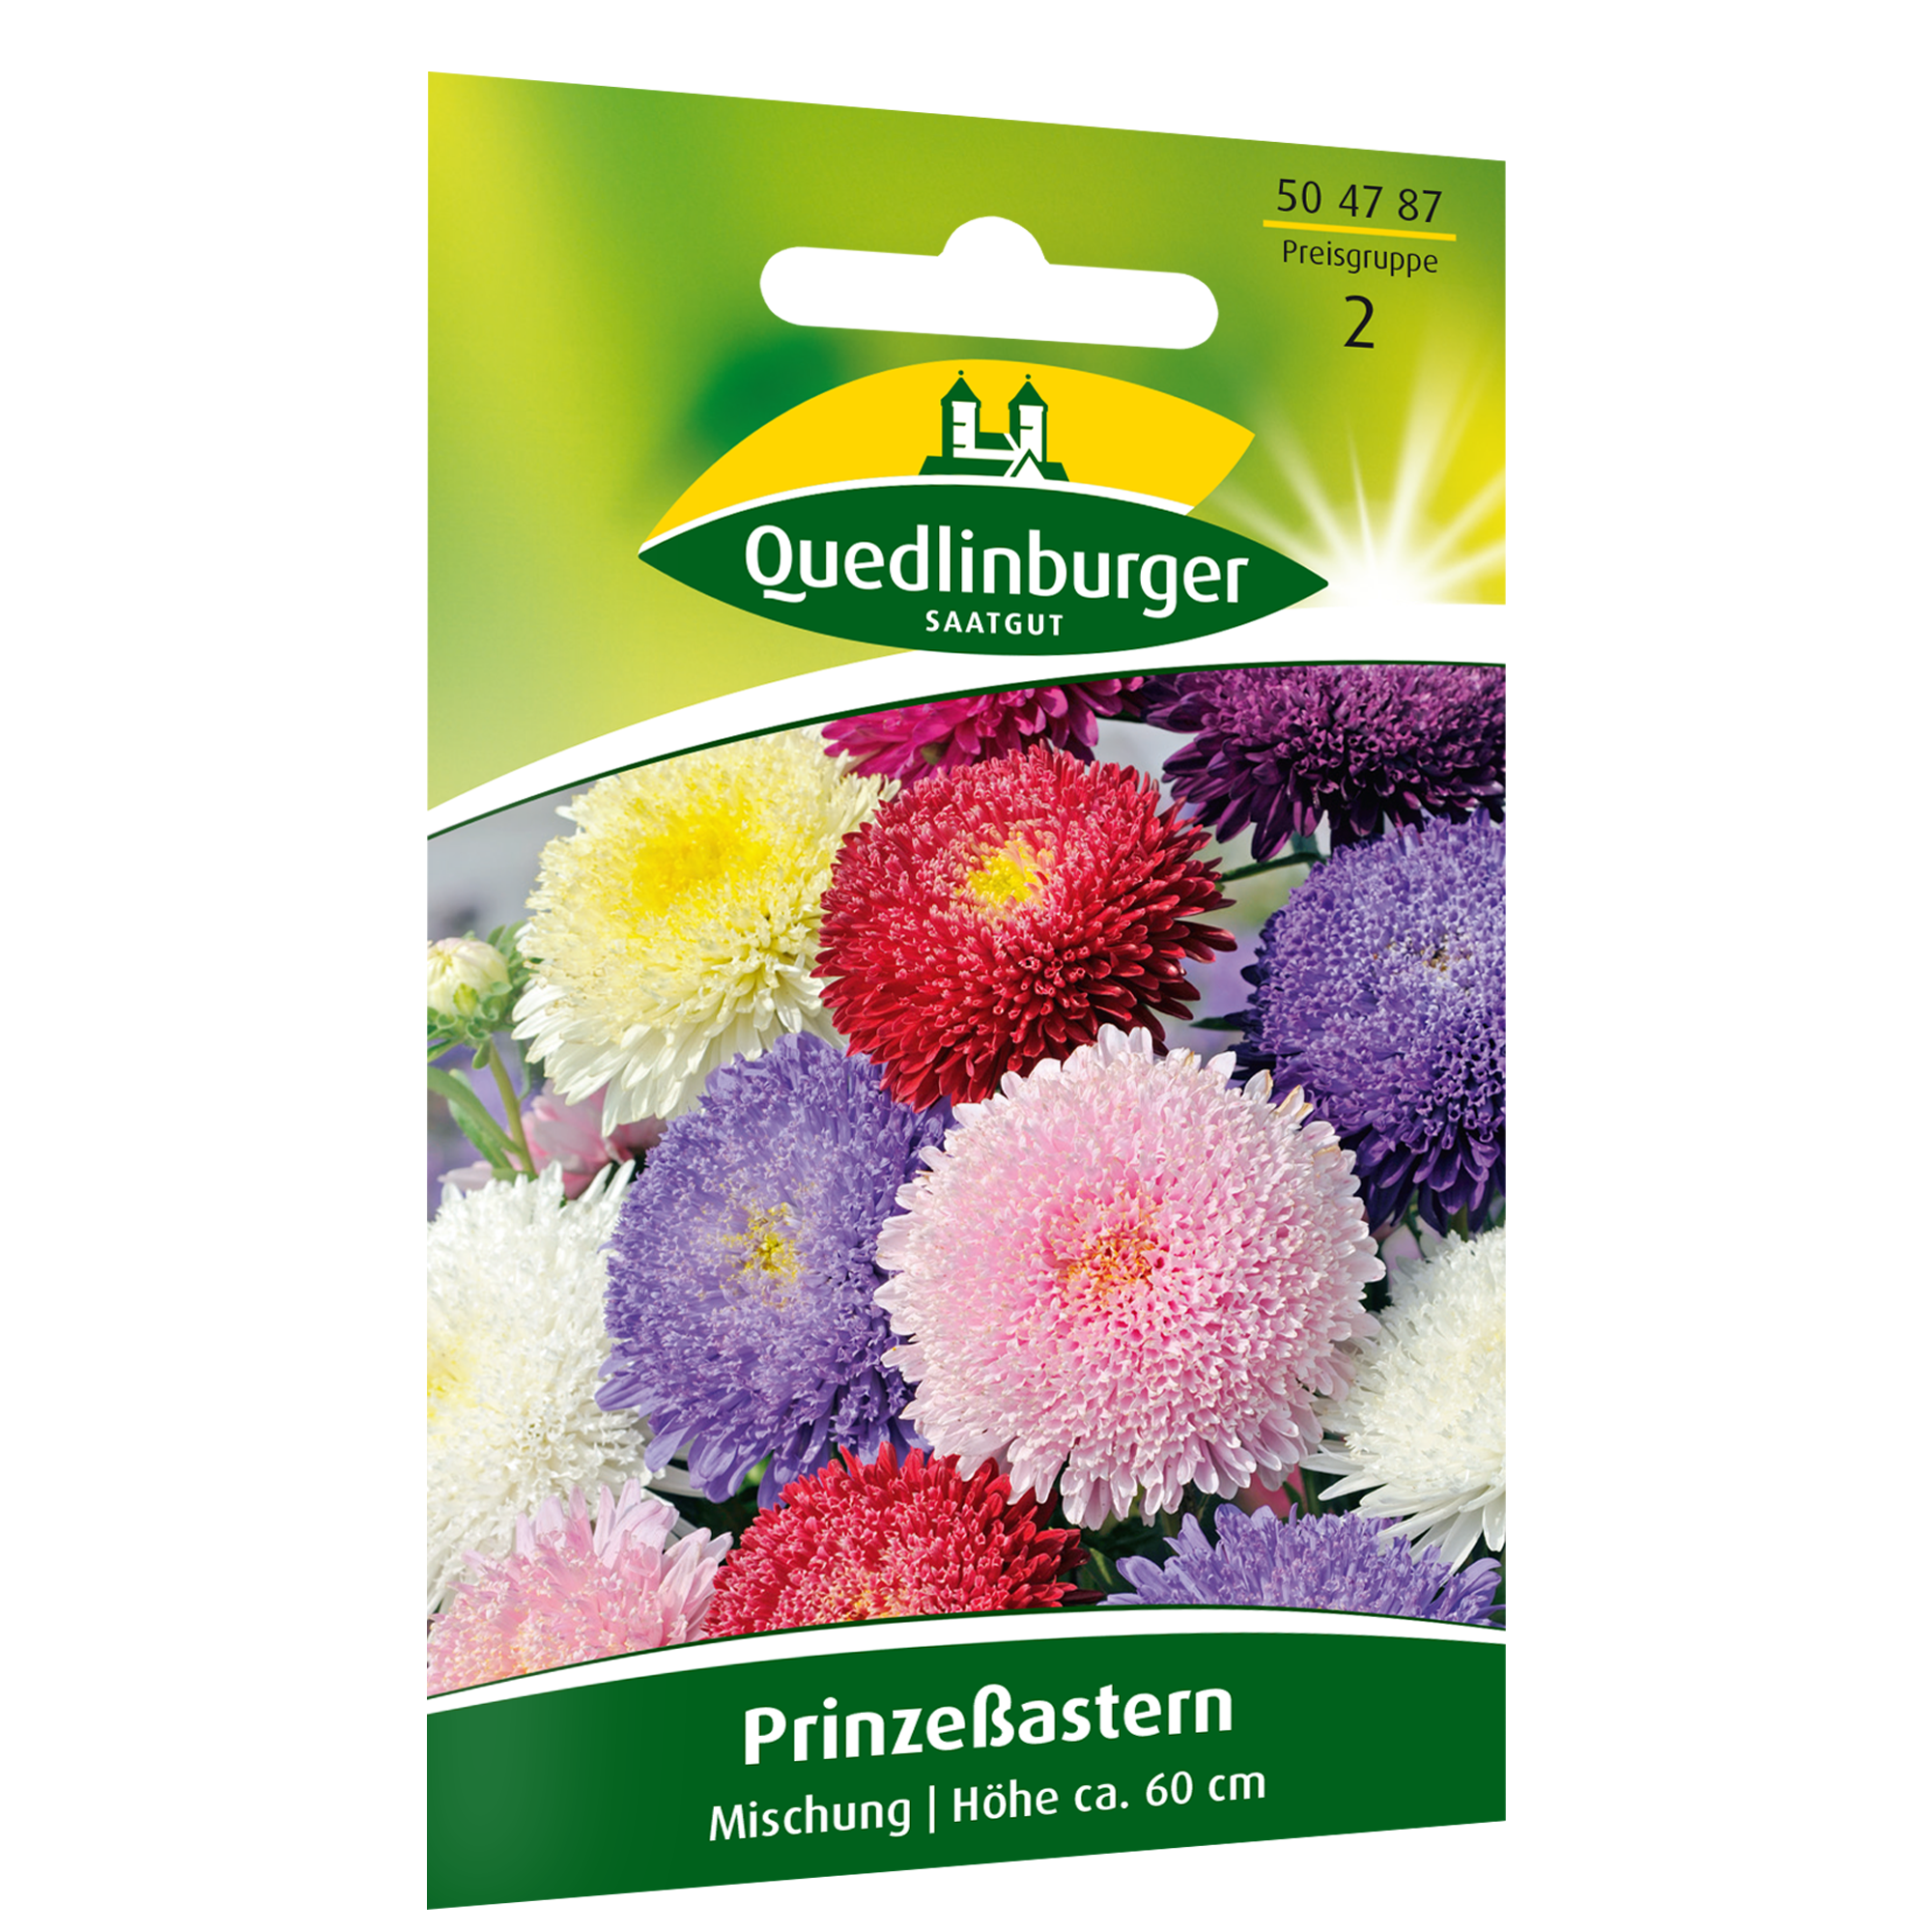 Prinzeßastern Mischung + product picture